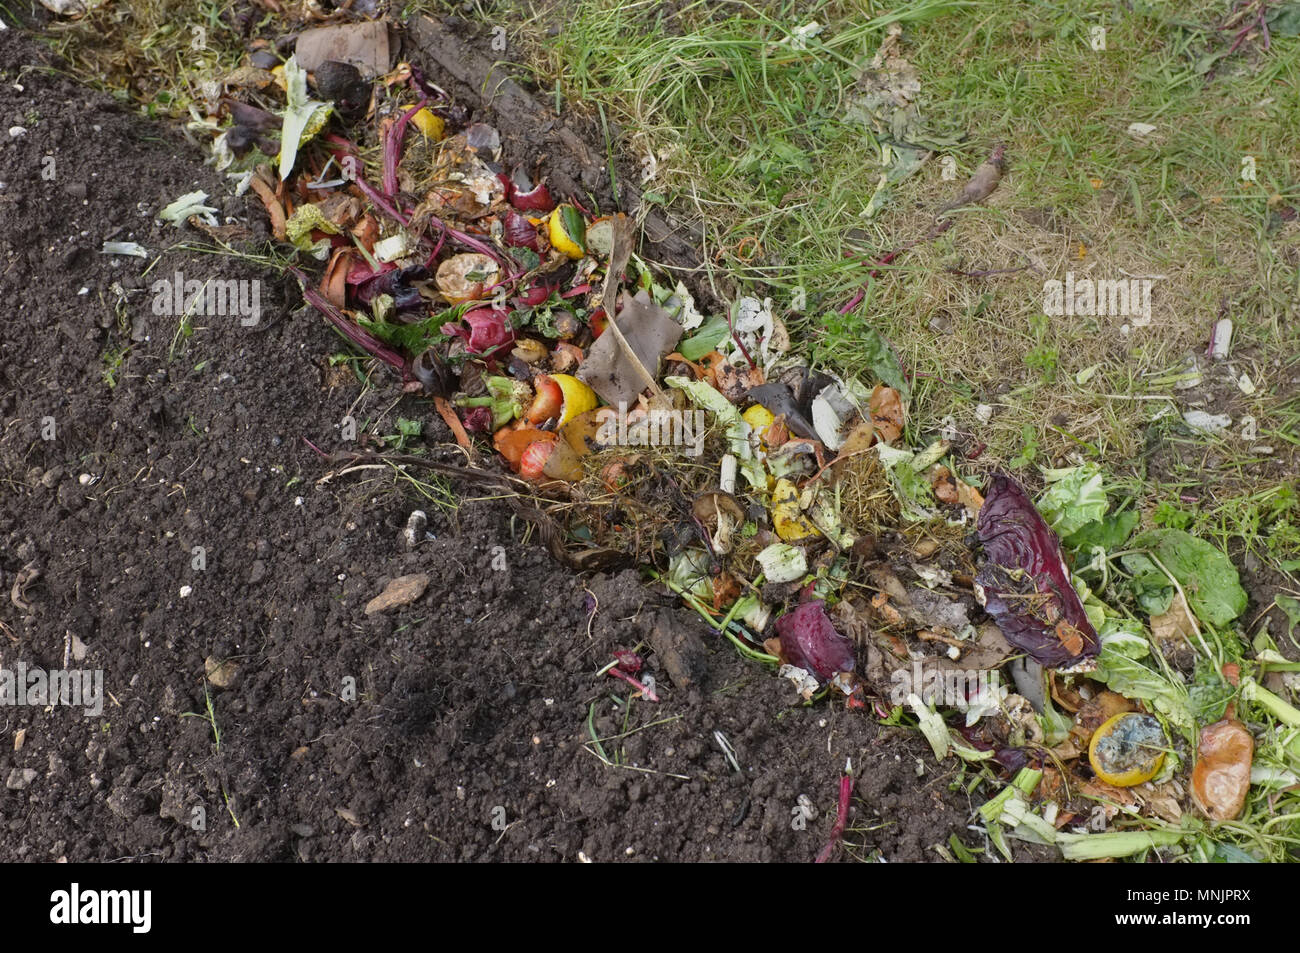 A trench dug and filled with kitchen scraps to grow runner and French beans. Stock Photo